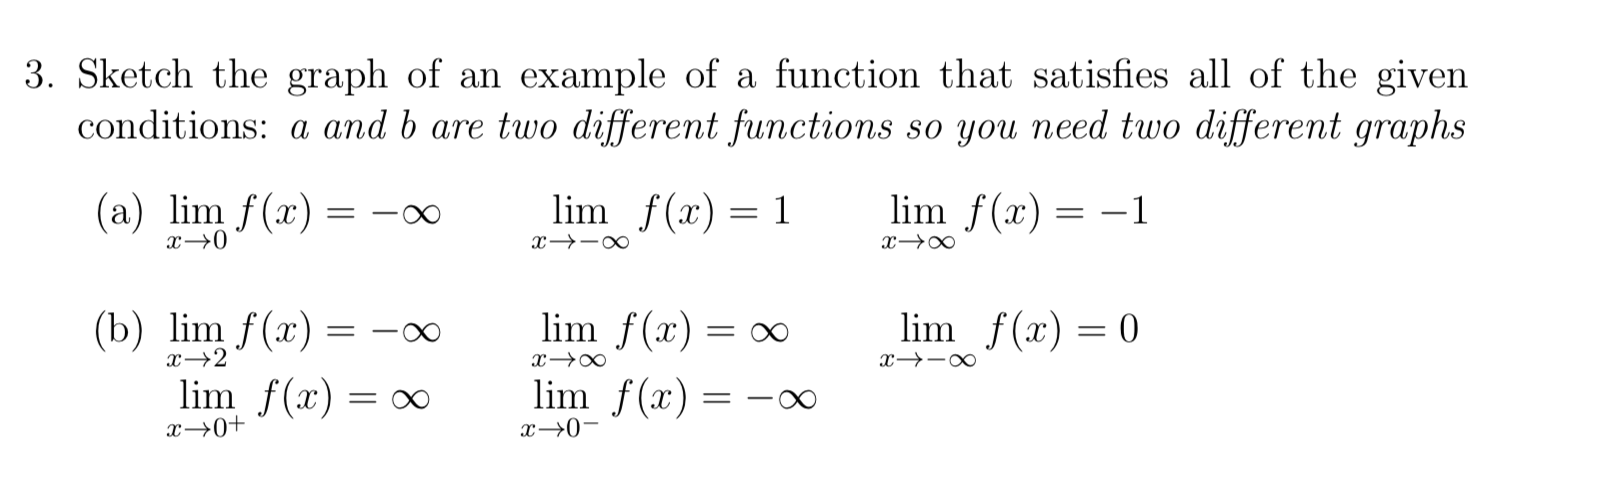 3. Sketch the graph of an example of a function that satisfies all of the given
conditions: a and b are two different functions so you need two different graphs
(a) lim f(x) :
lim f(x) = 1
lim f(x) = –1
x→0
(b) lim f(x) = -∞
lim f(x) = ∞
lim f(x) = 0
x→2
x→-∞
lim f(x) = ∞
lim f(x) =
||
x→0+
x→0-
